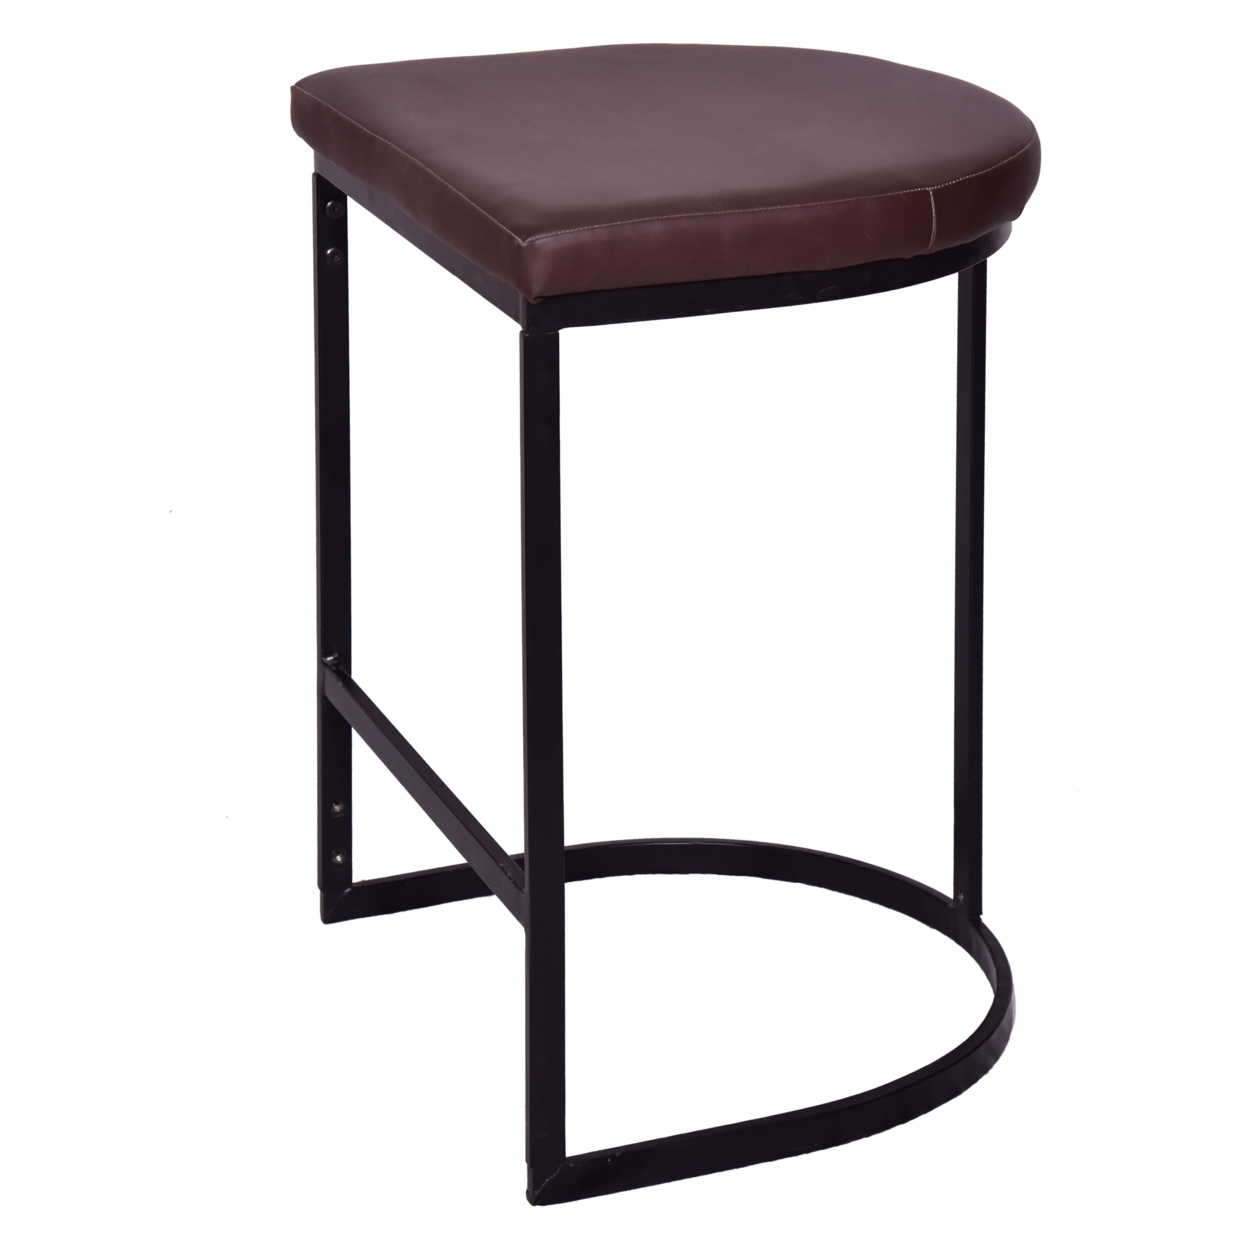 26 Inch Counter Height Stool With Vegan Faux Leather Upholstery, Black Iron Frame, Dark Brown- Saltoro Sherpi